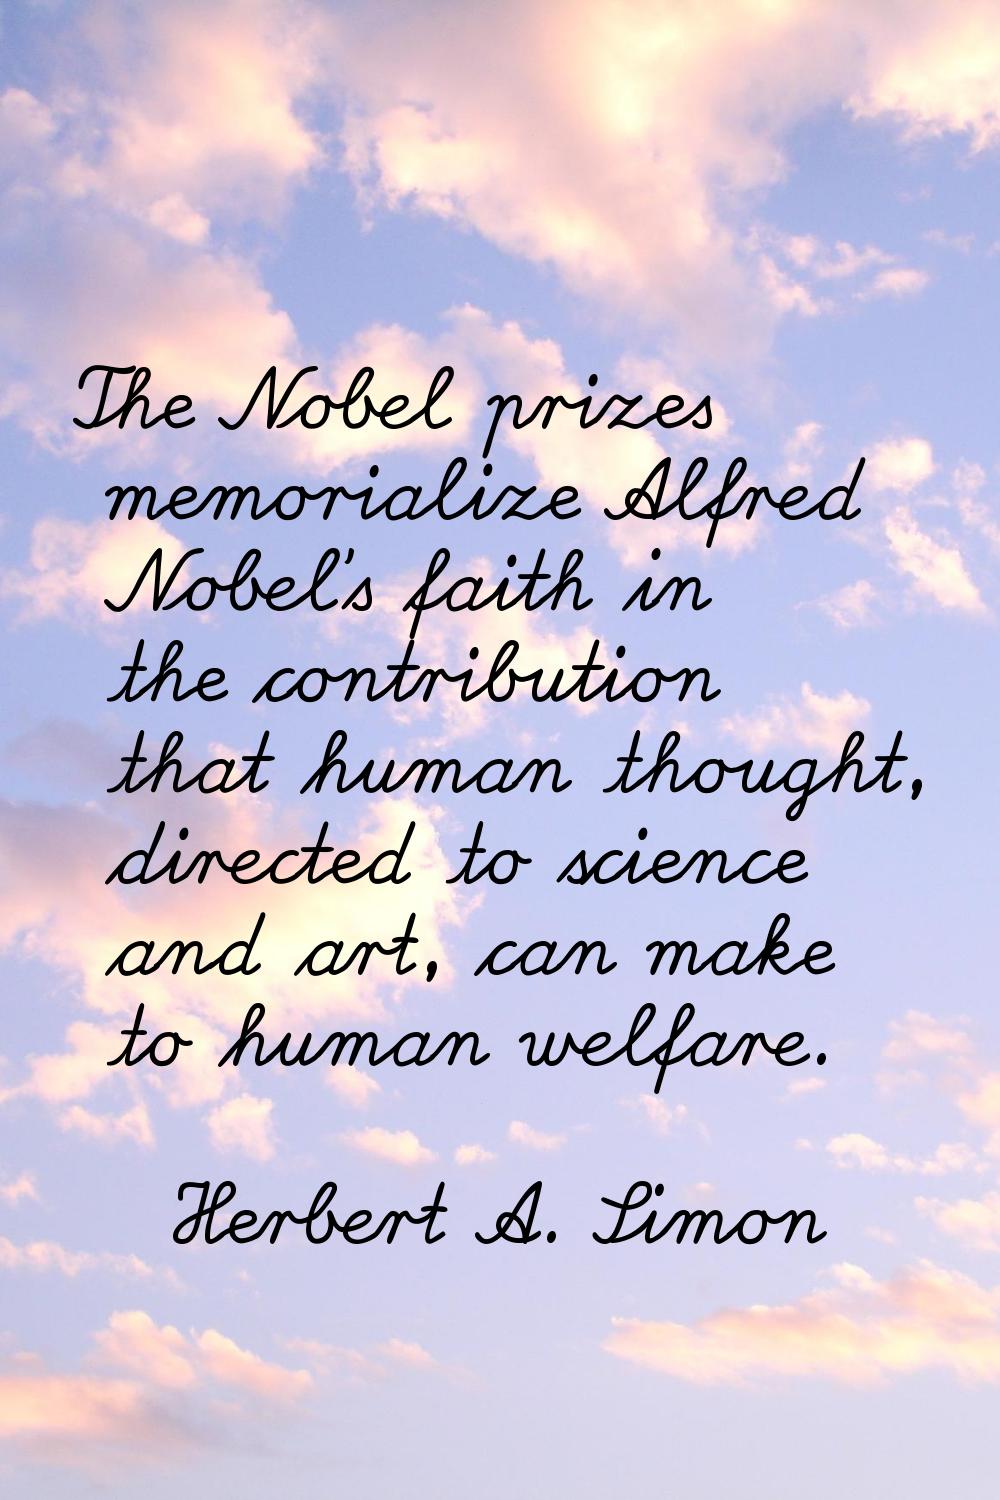 The Nobel prizes memorialize Alfred Nobel's faith in the contribution that human thought, directed 